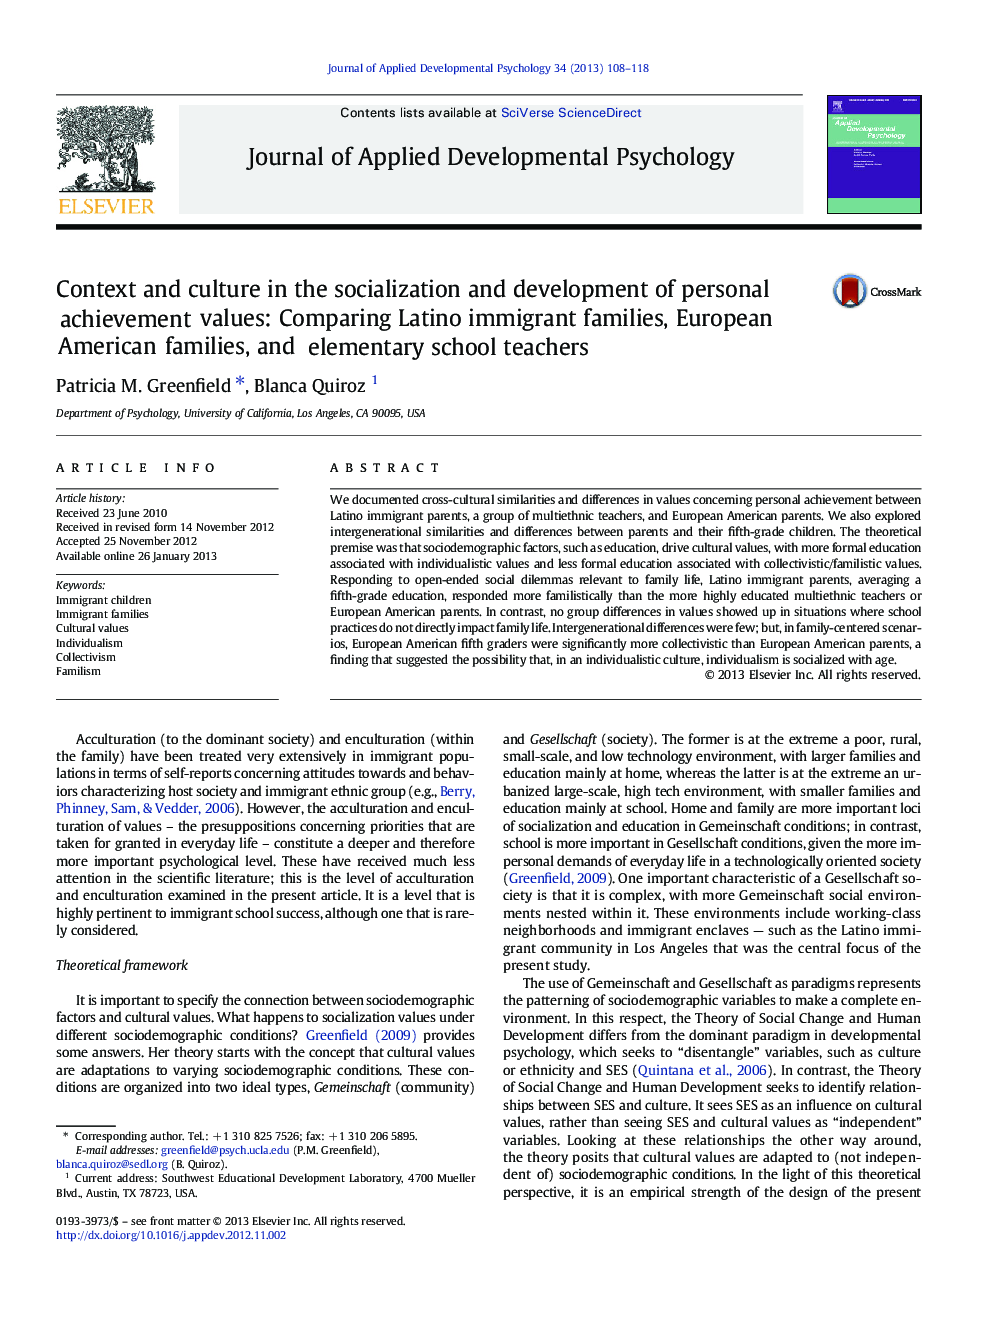 Context and culture in the socialization and development of personal achievement values: Comparing Latino immigrant families, European American families, and elementary school teachers